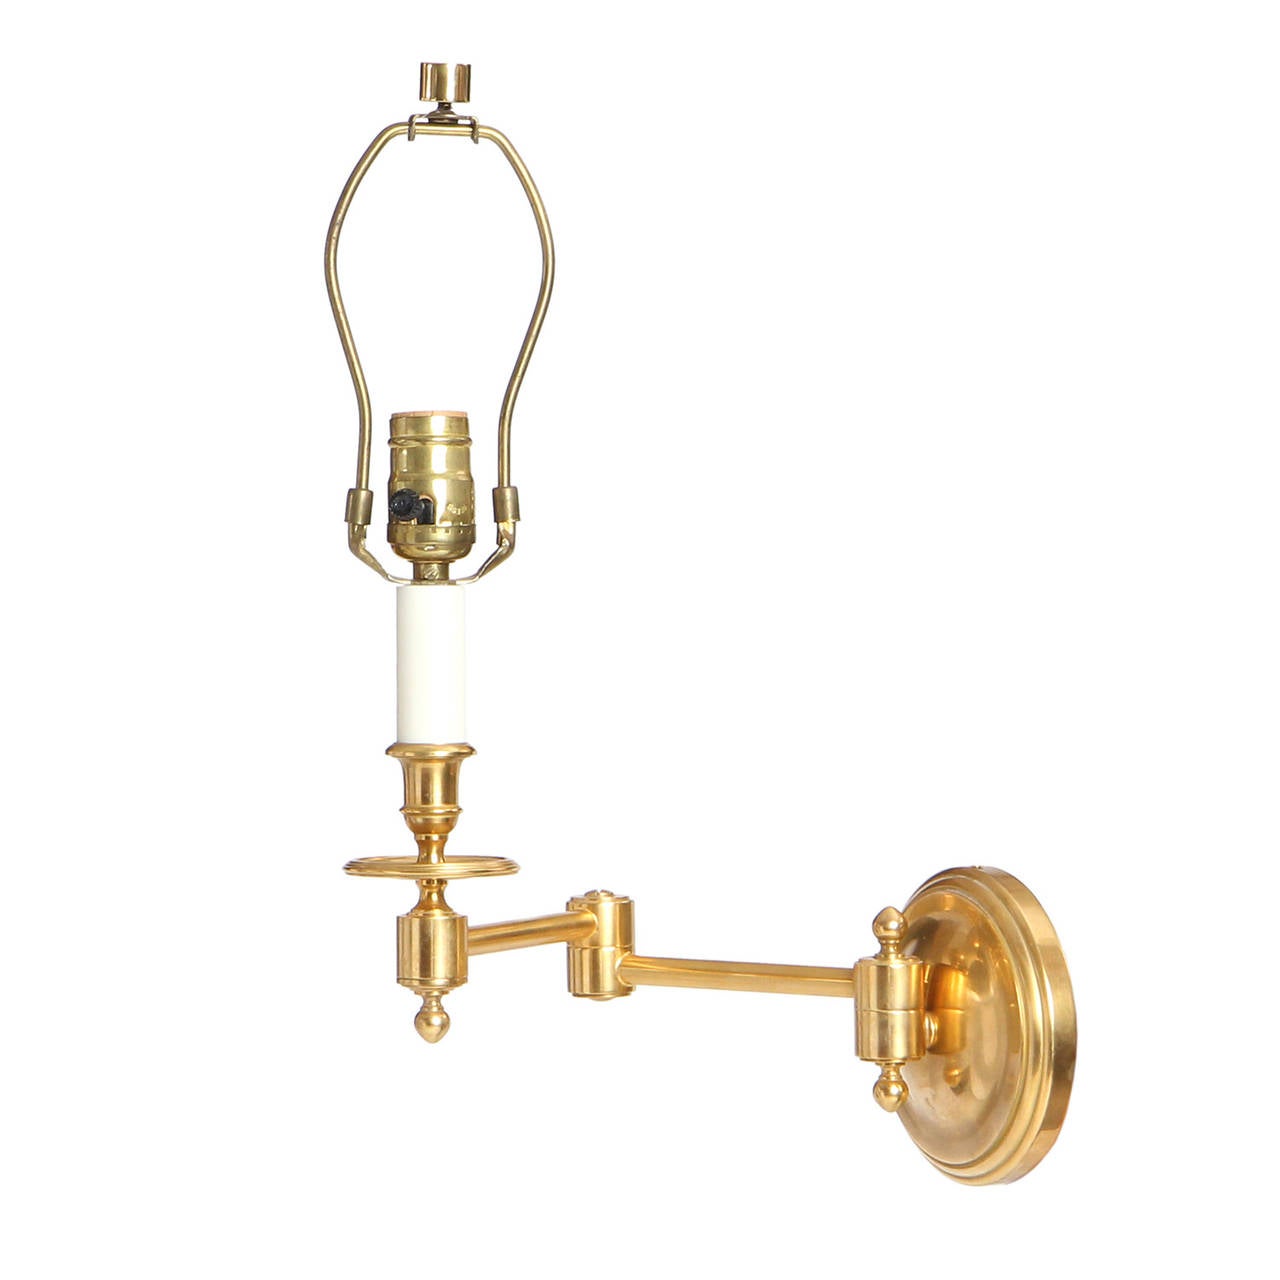 A Pair of Brass Swing Arm Wall Sconces 2